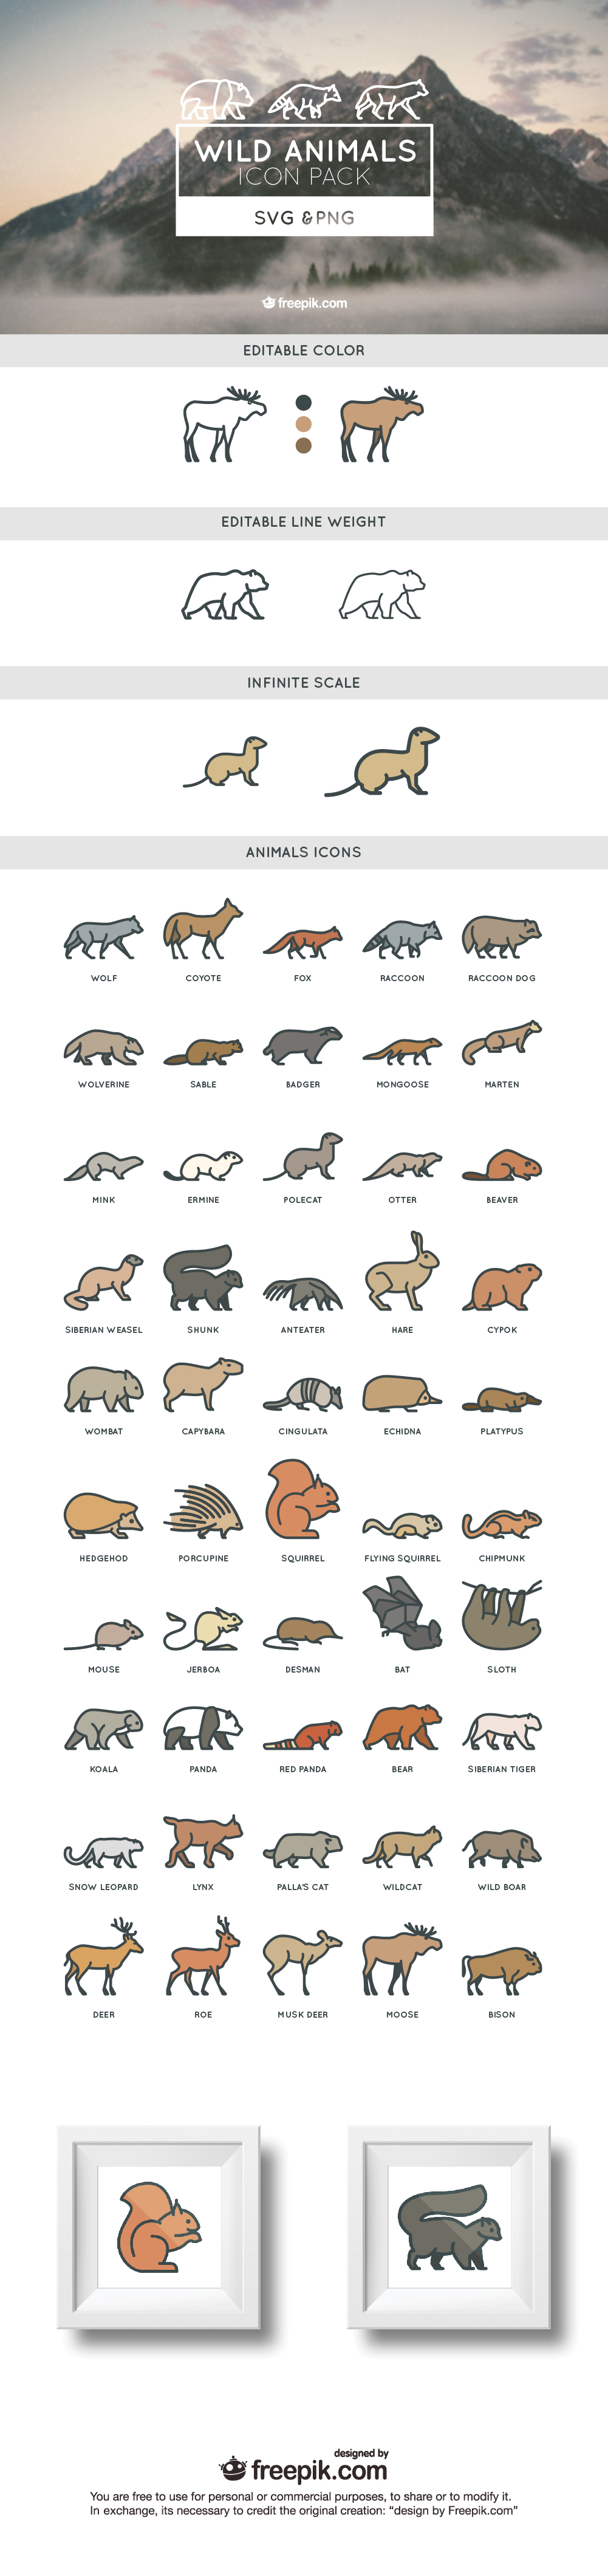 Pallas's Cat svg #12, Download drawings